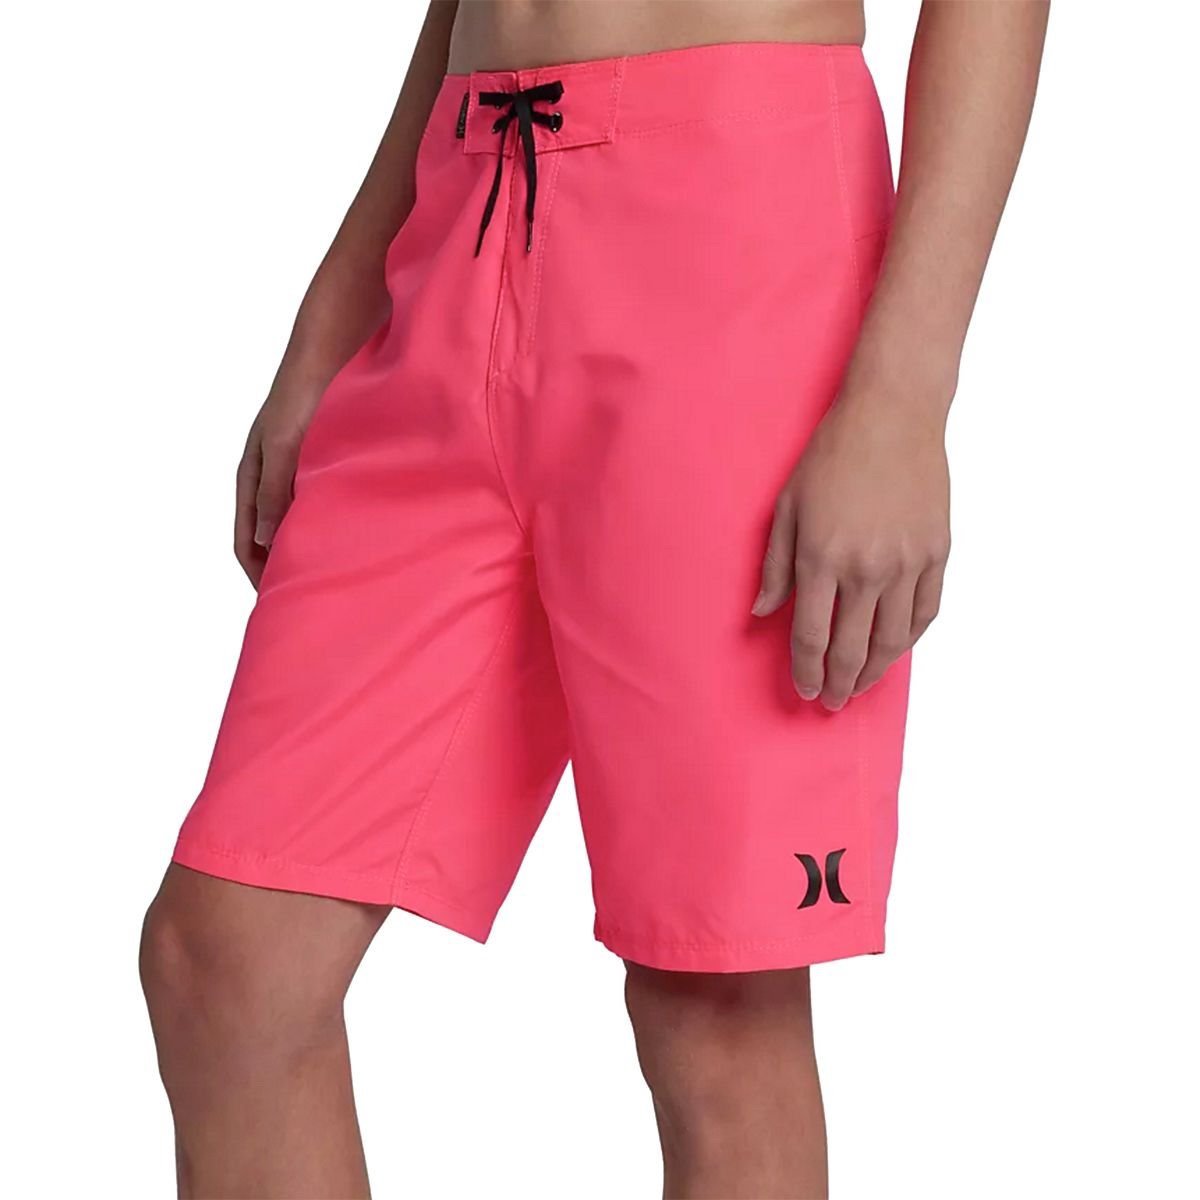 BUY ASFTWO Surf Board Shorts ON SALE NOW! - Cheap Surf Gear